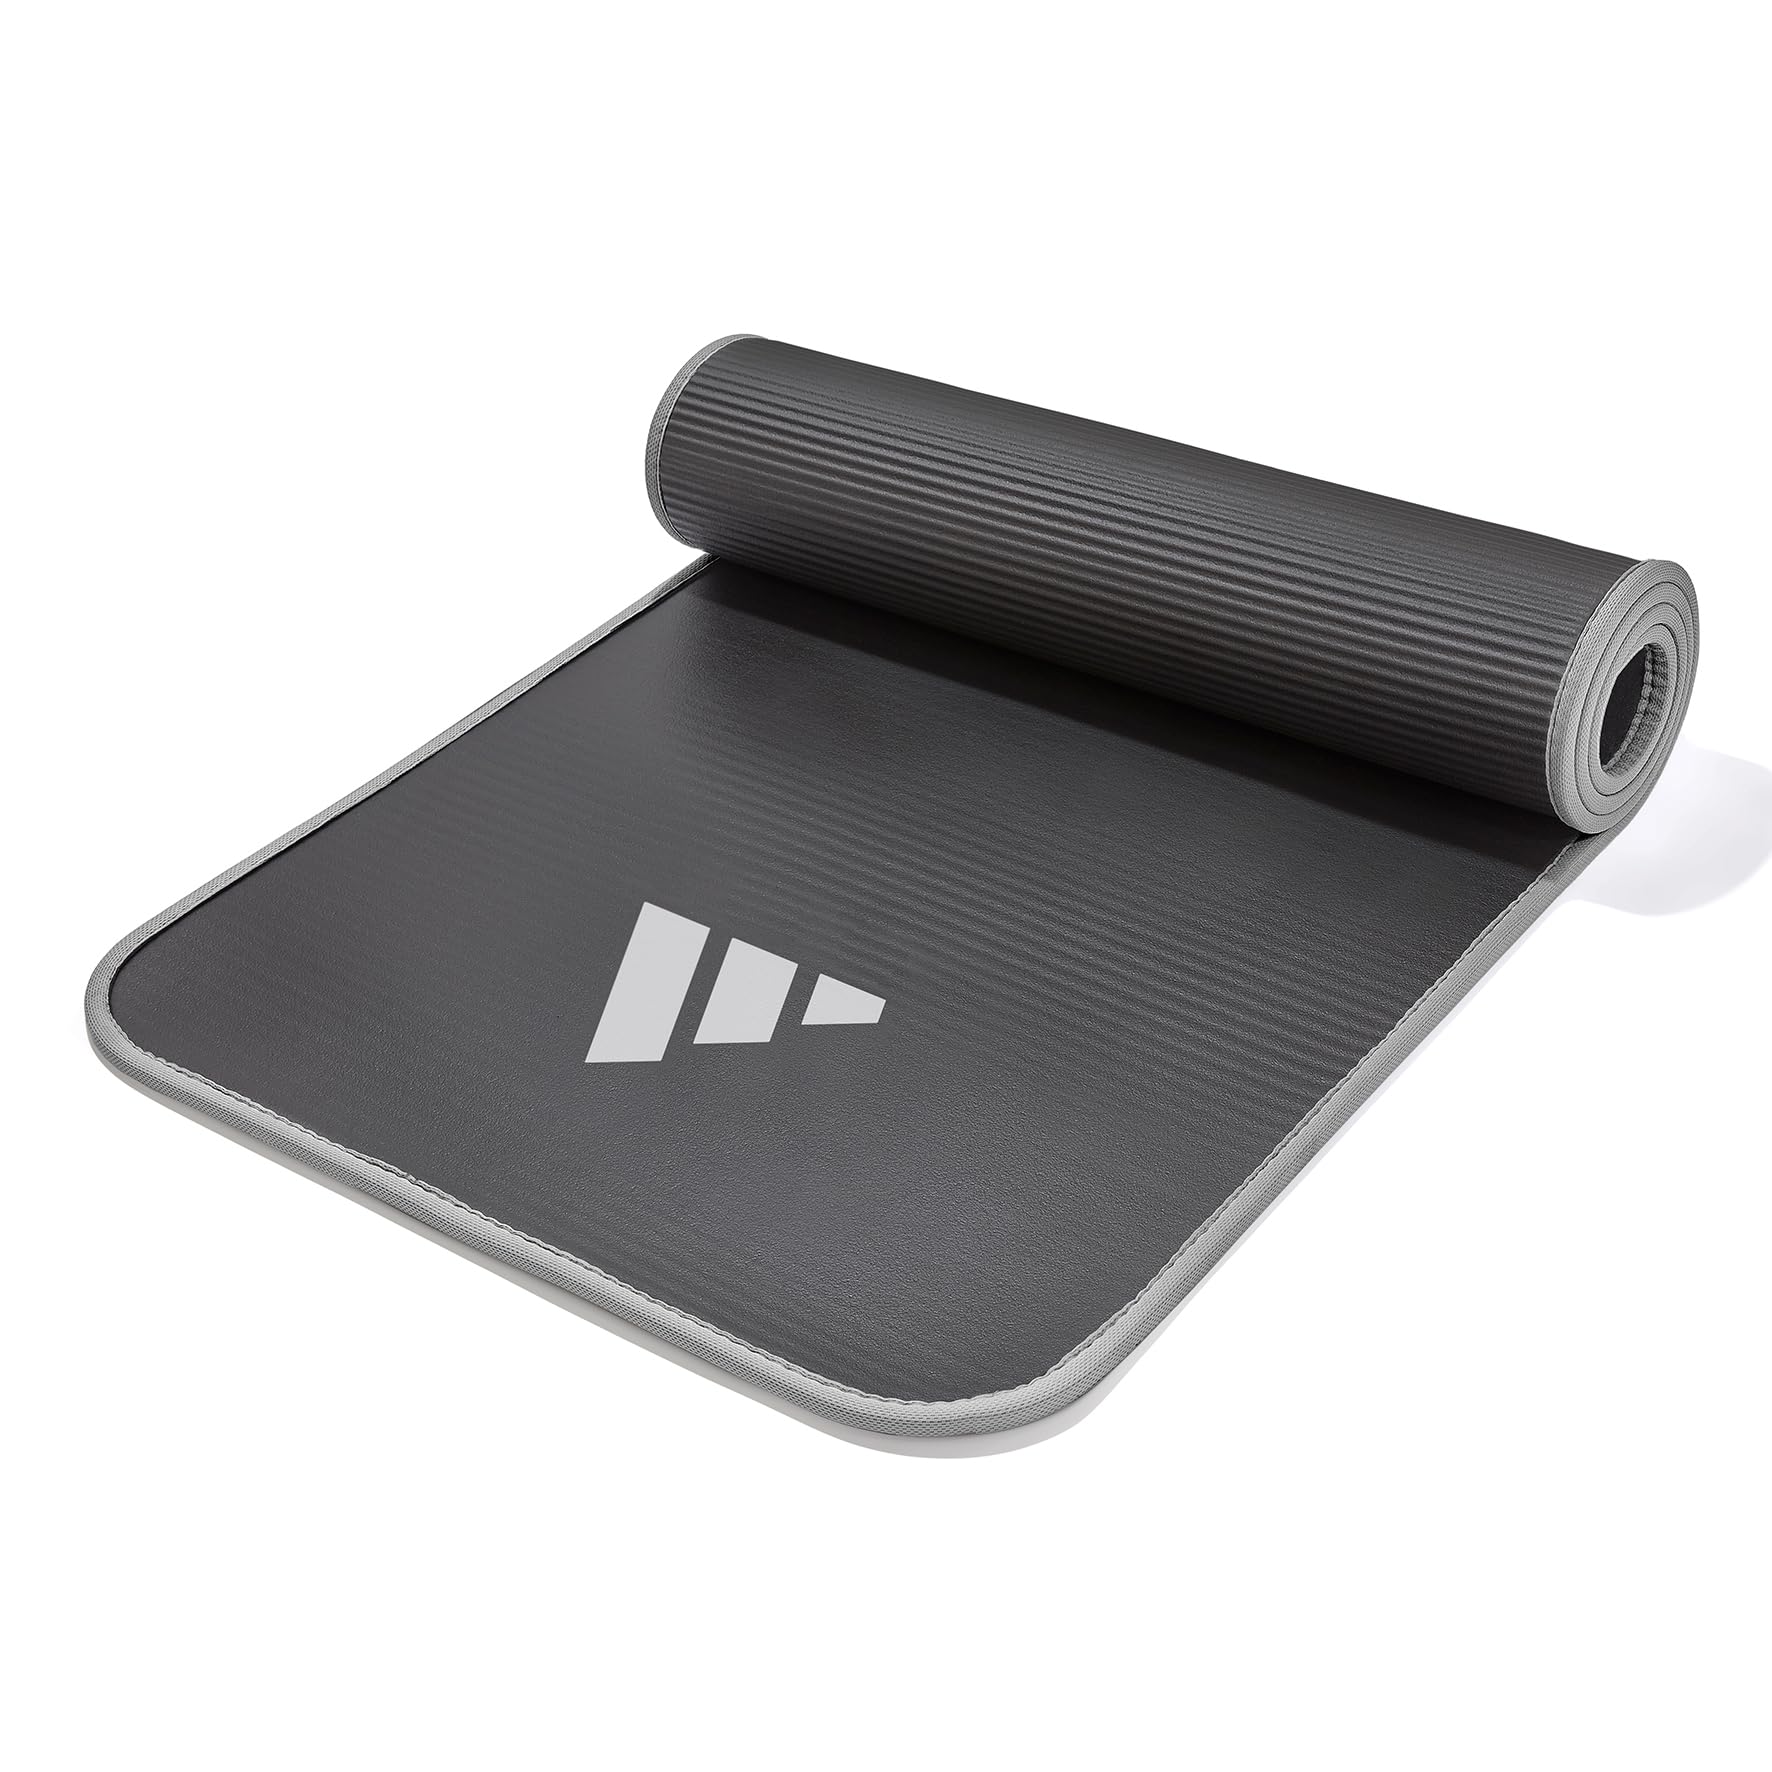 adidas 10mm Extra Thick Training Mat with Carrying Strap and Non-Slip Textured Base - Cushioned Workout Mat for Home Gym, Floor Workouts, and Intense Exercises - Portable and Durable - Grey